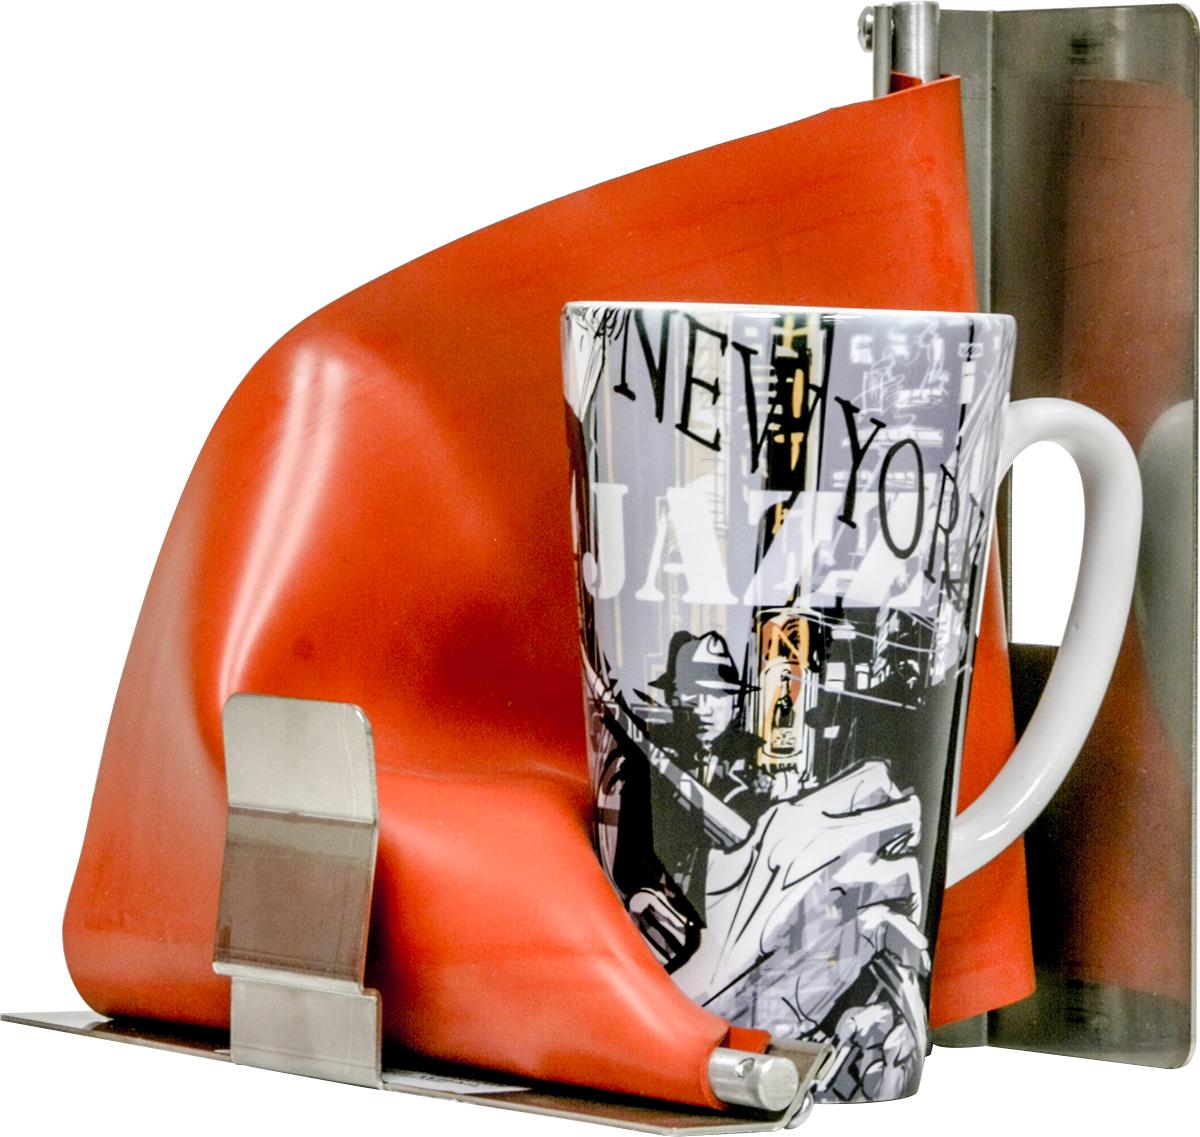 HIX 6" Tapered Sublimation Oven 17 oz. Latte Cup Wrap